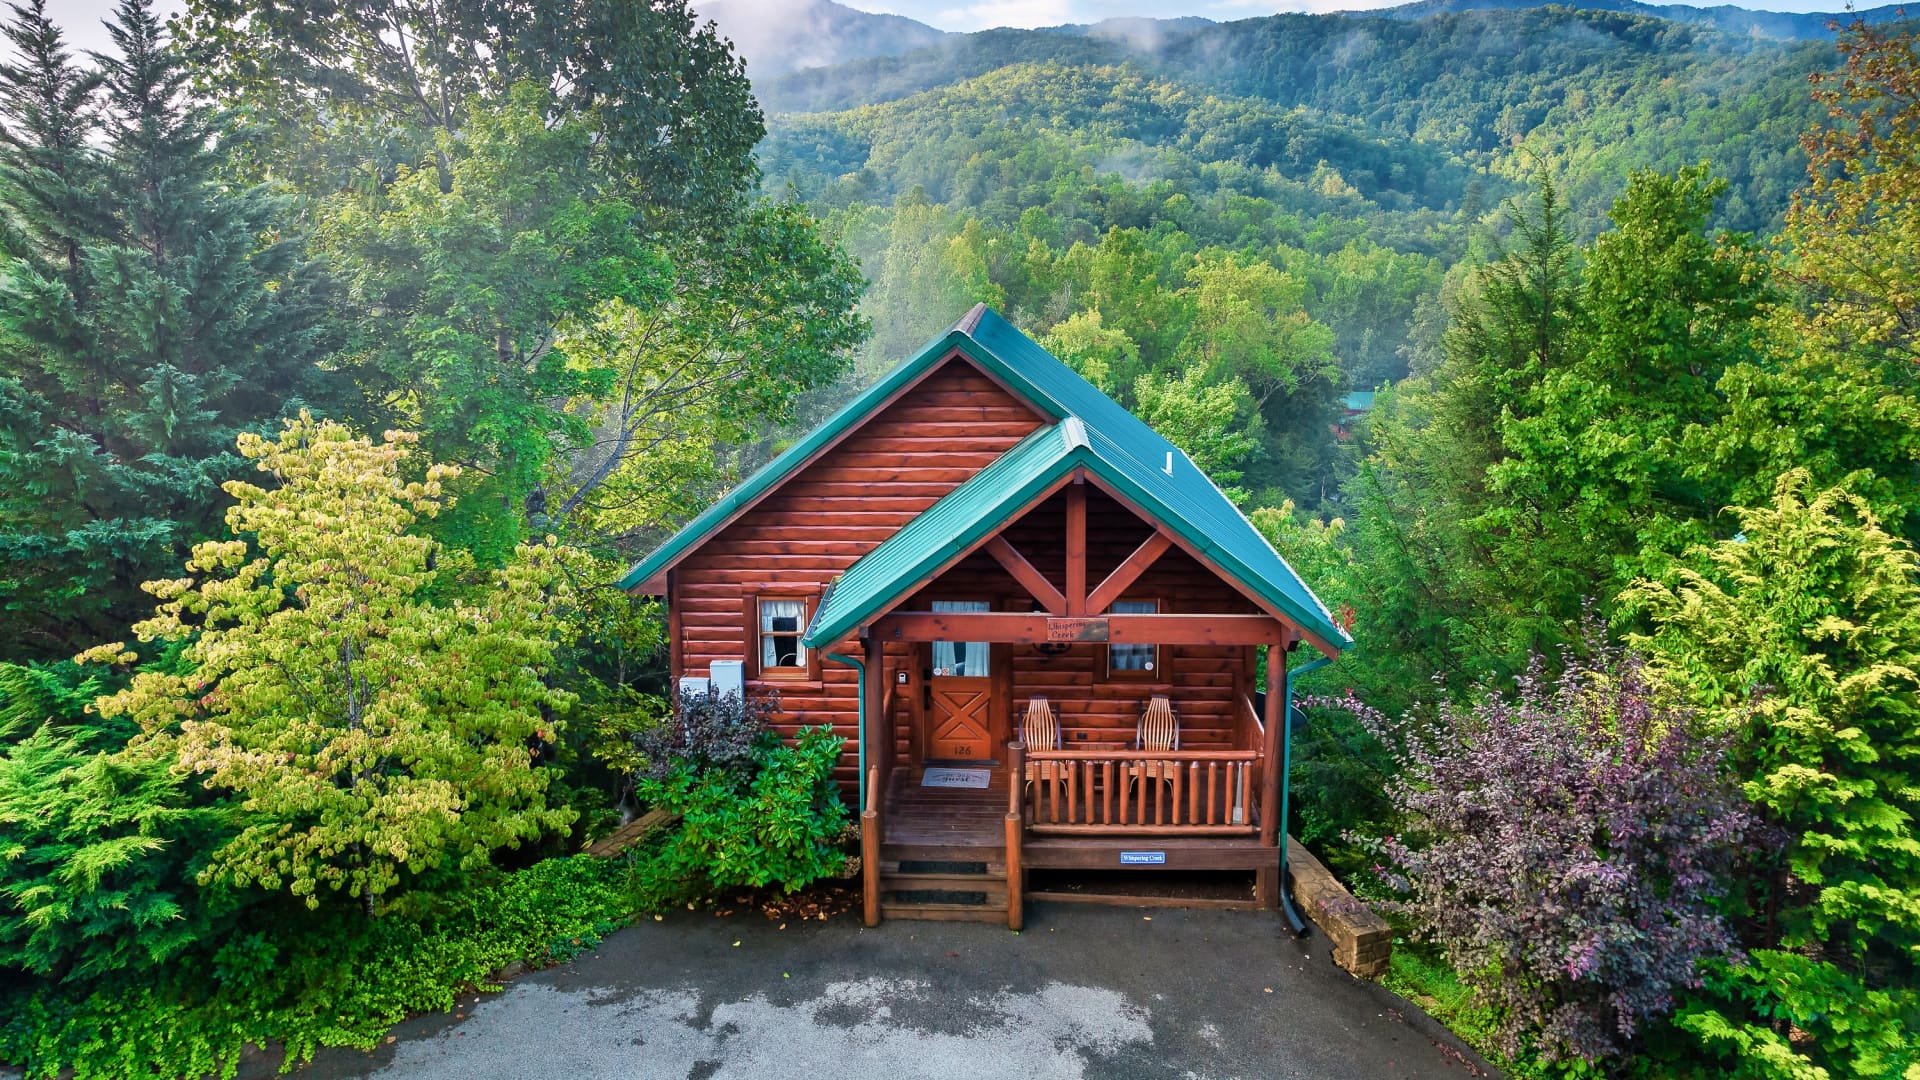 This cabin is nestled in the Smoky Mountains in Gatlinburg, Tennessee, United States.